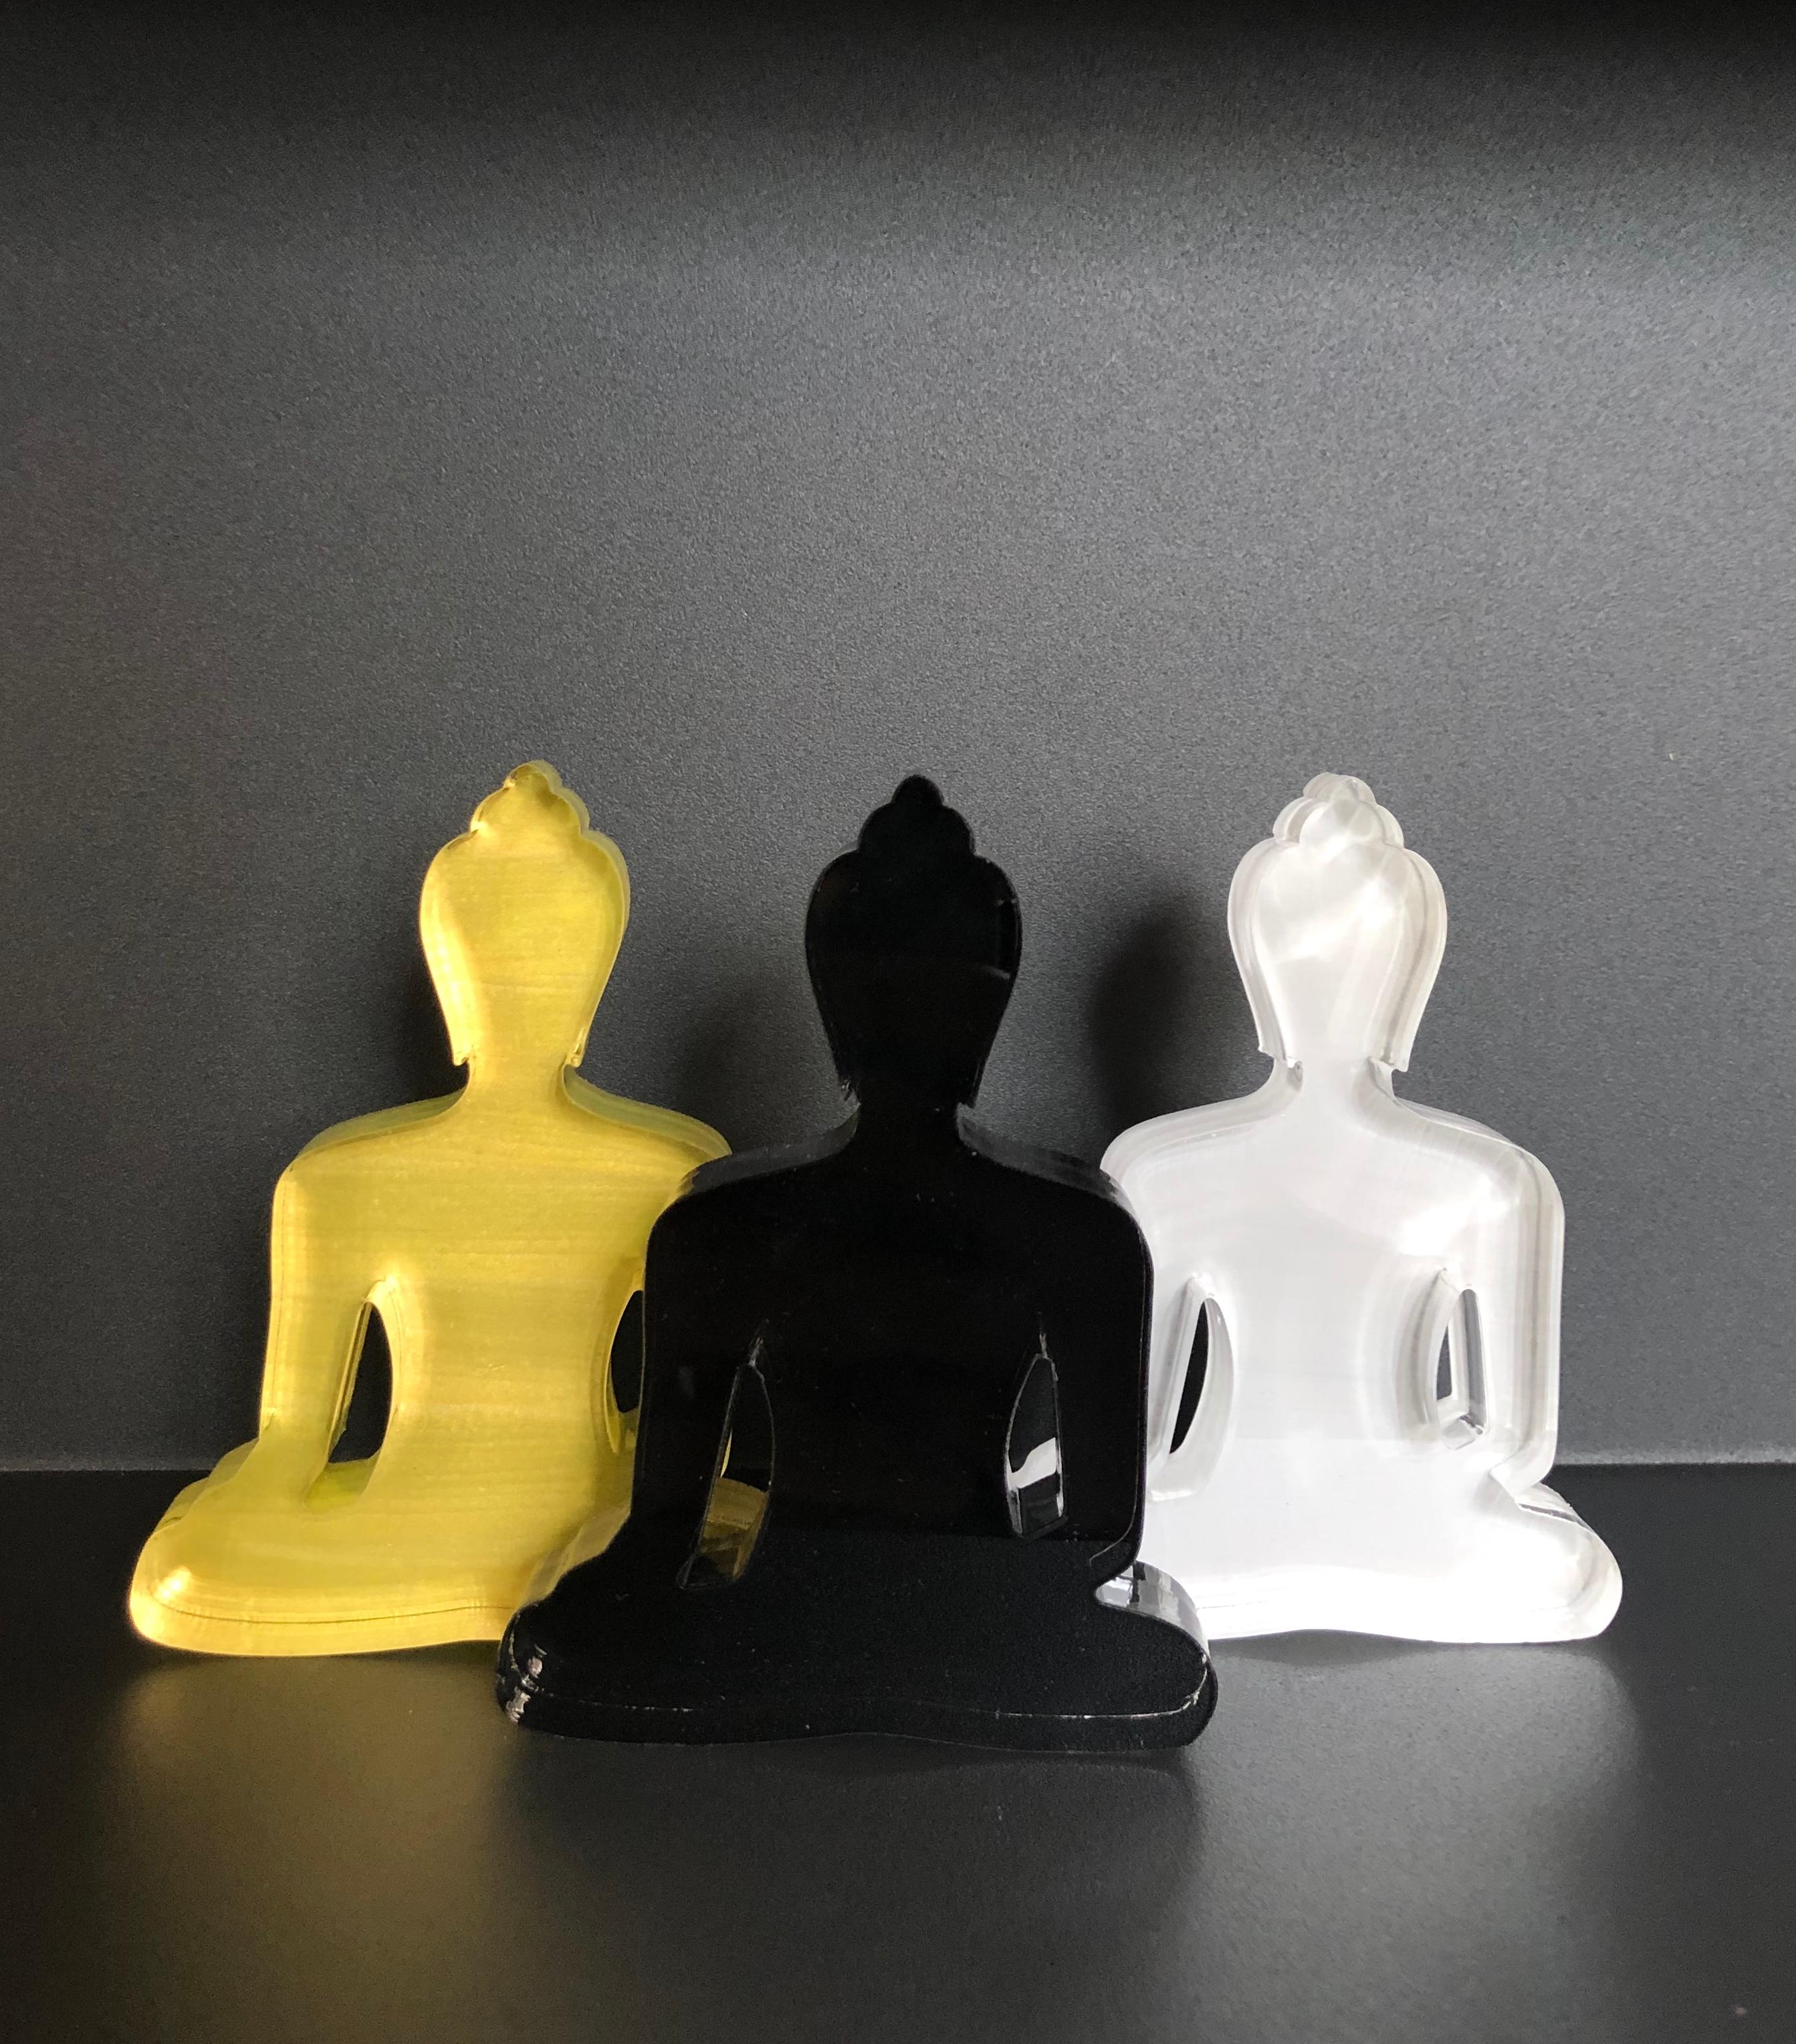 Buddha statues set of 3, hand painted plexiglass - Gold, White, Black - Contemporary Sculpture by Tal Nehoray